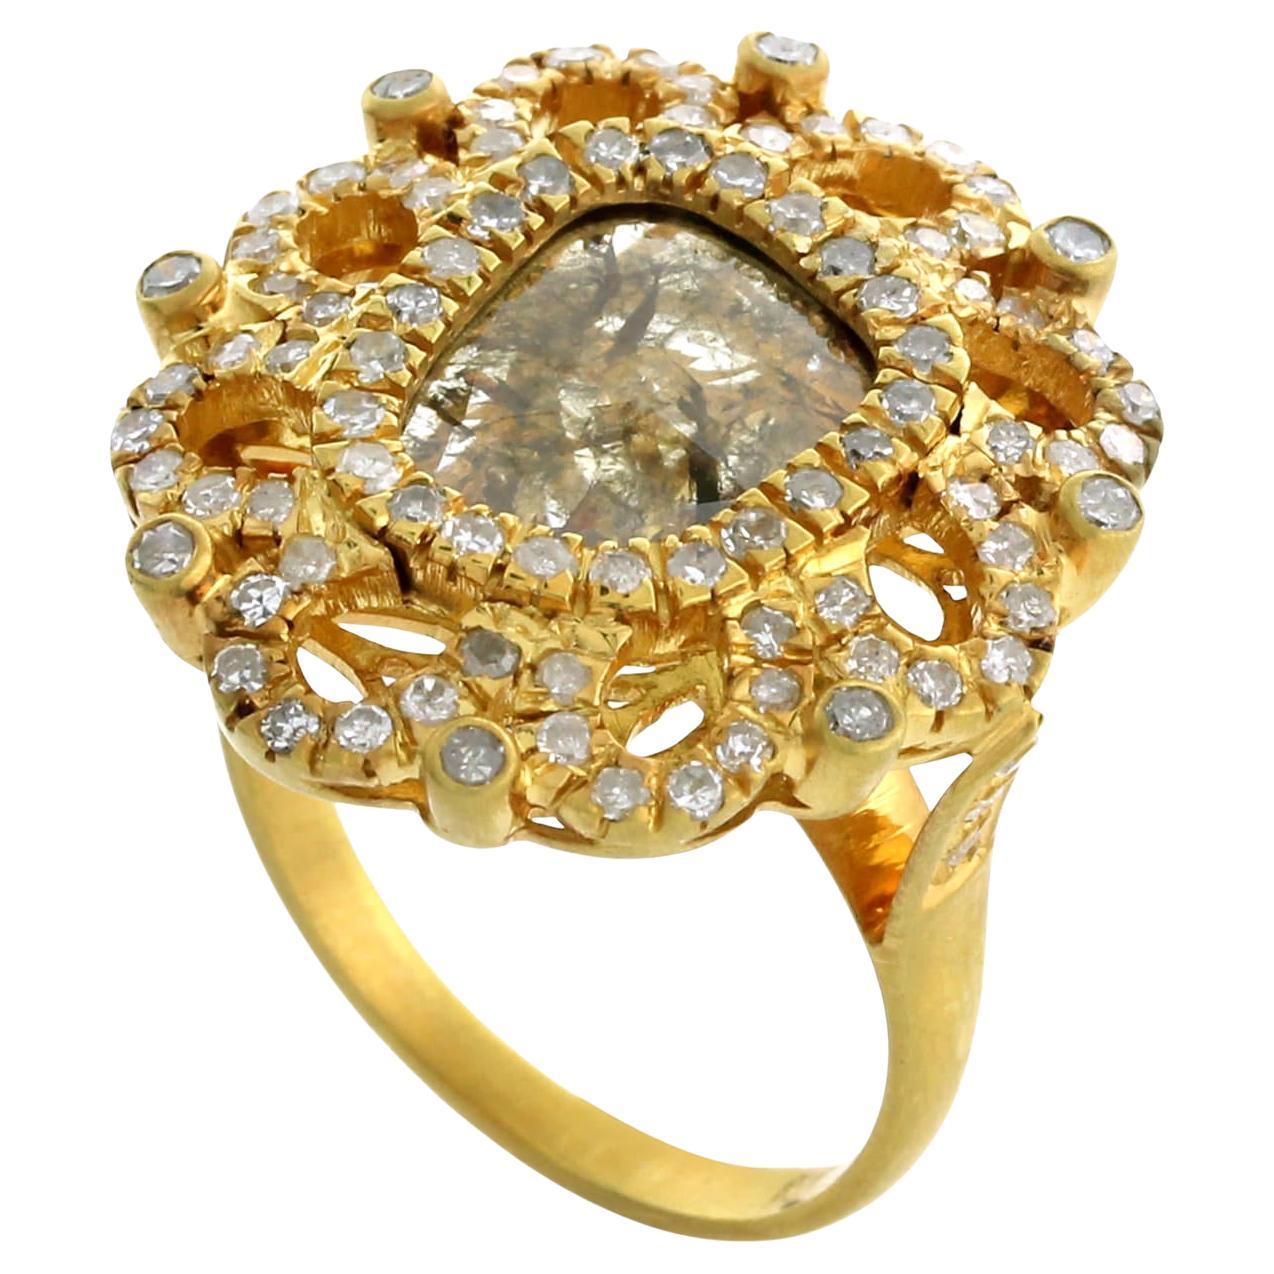 Slice Daimond Cocktail Ring With Pave Diamond Made In 18k Yellow Gold